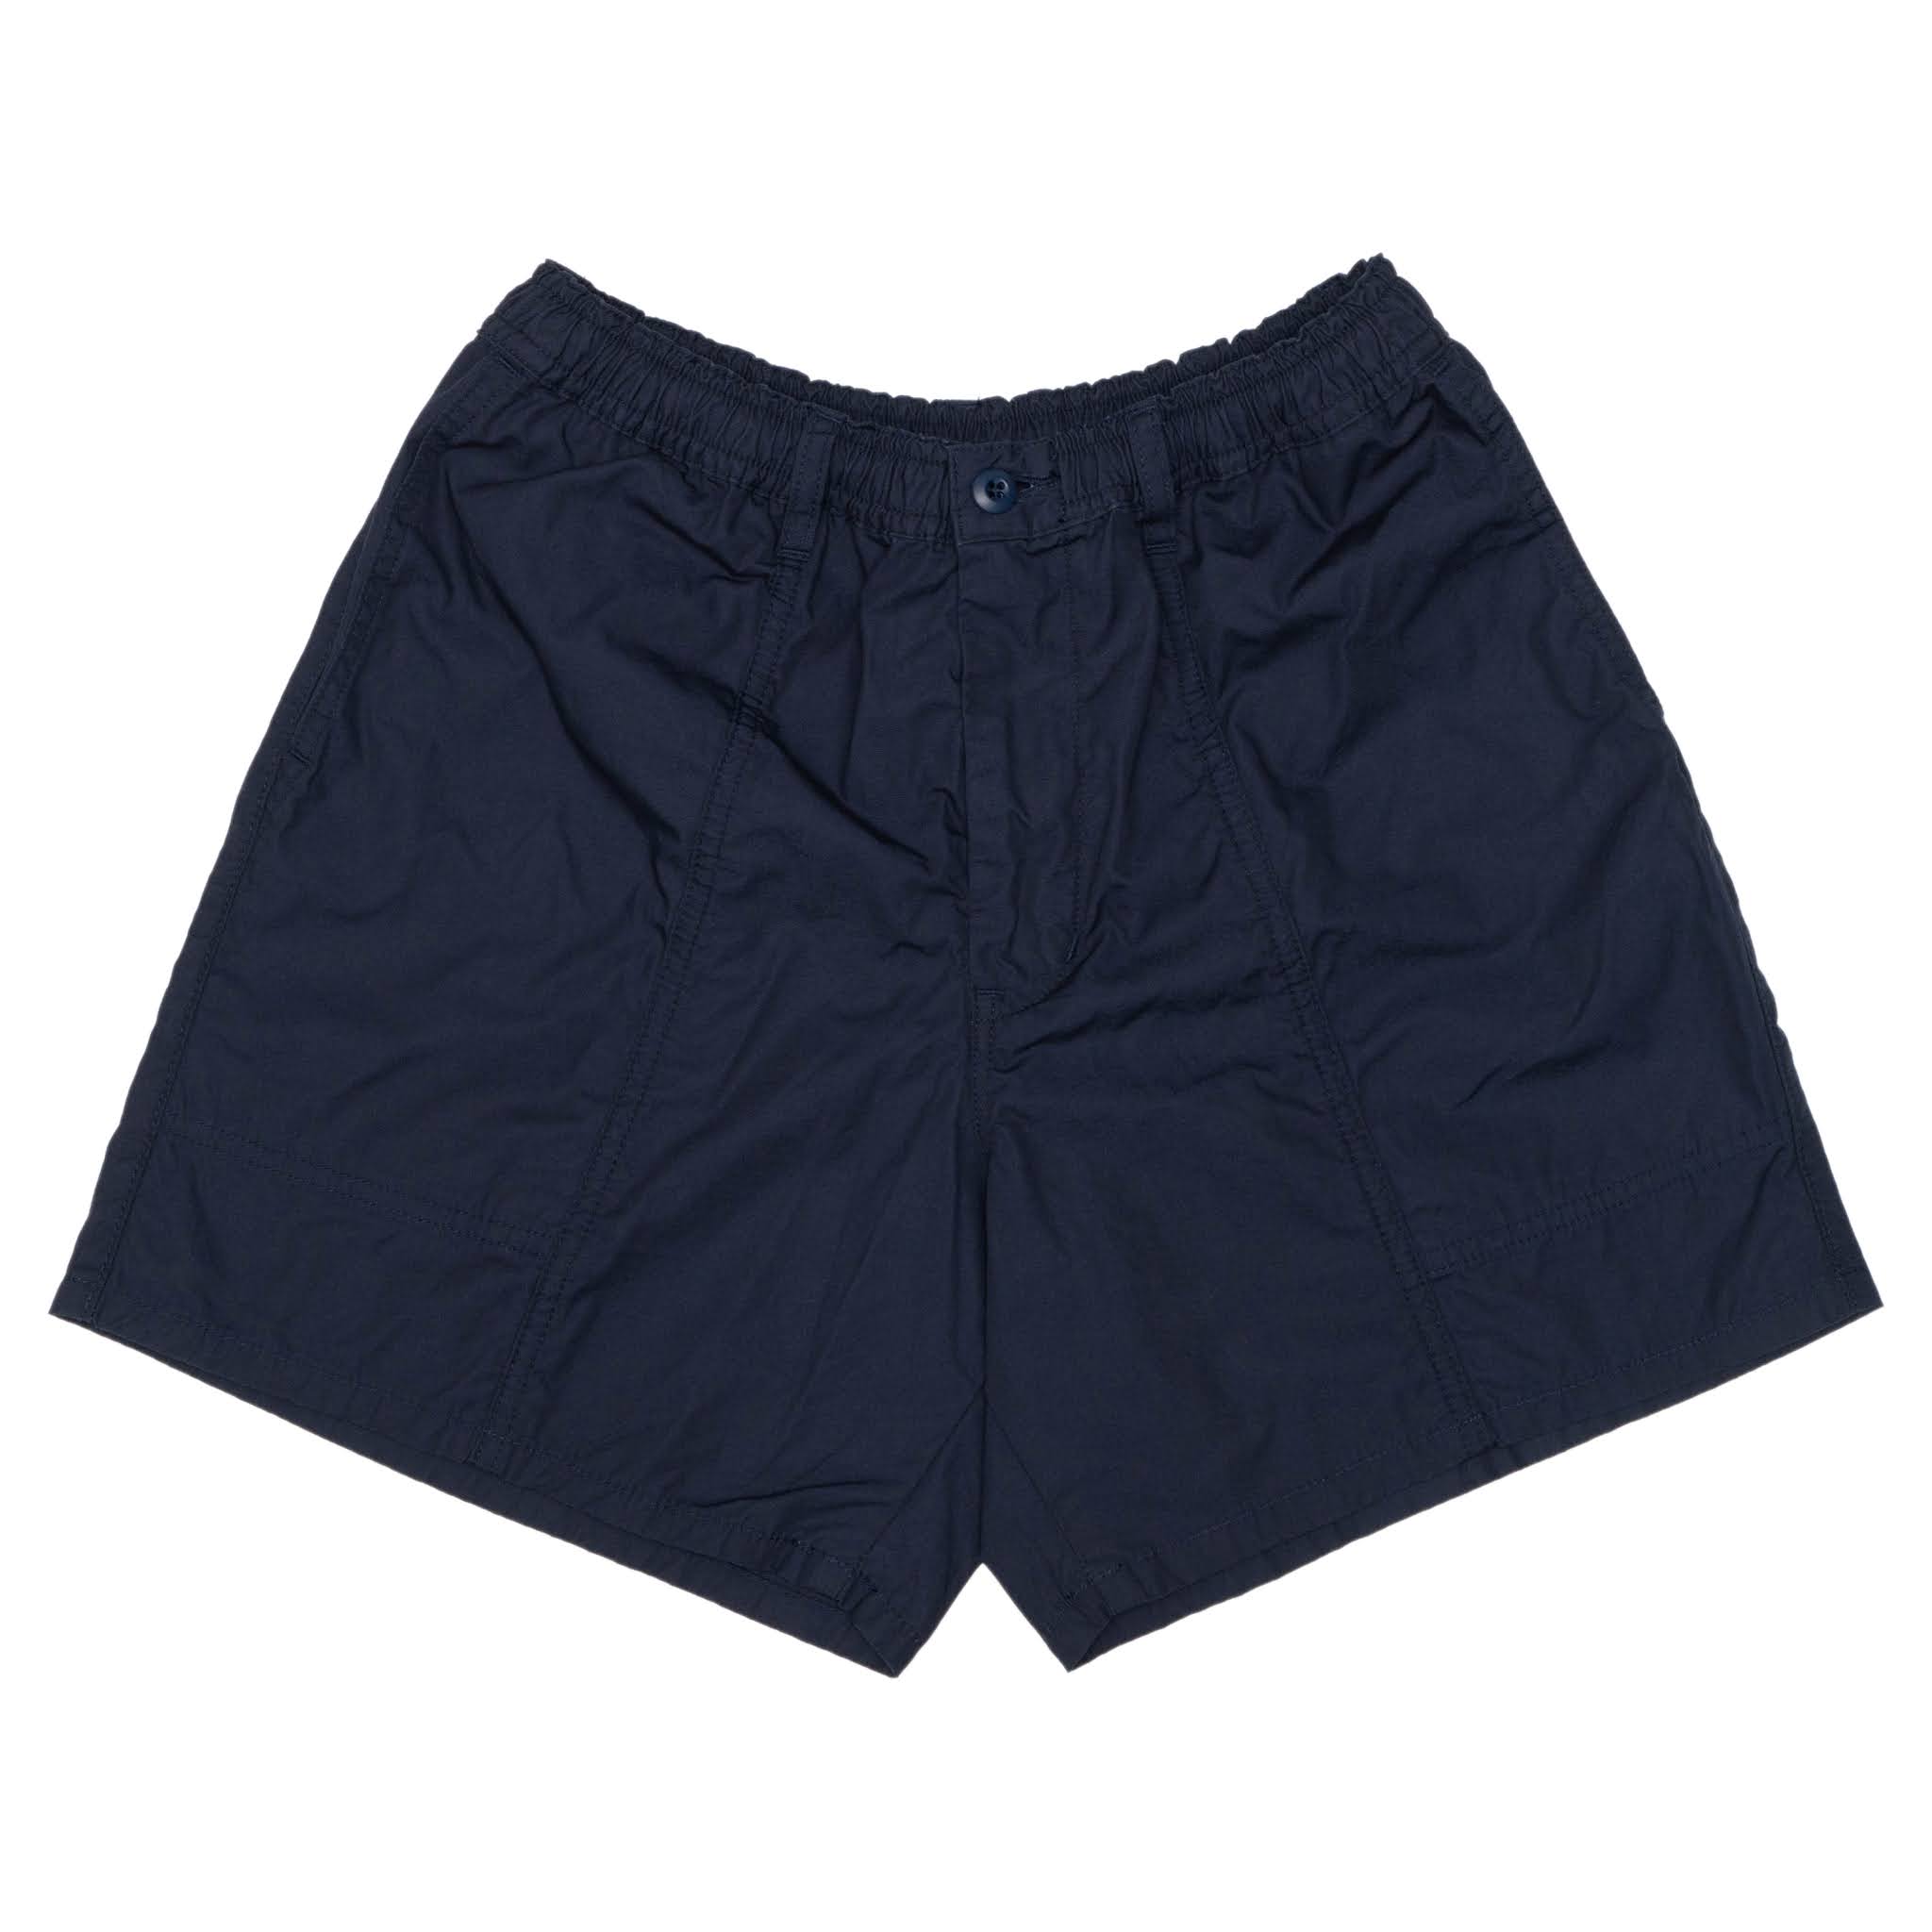 CUP AND CONE: Light Cotton Baggy Shorts - Navy, Grey